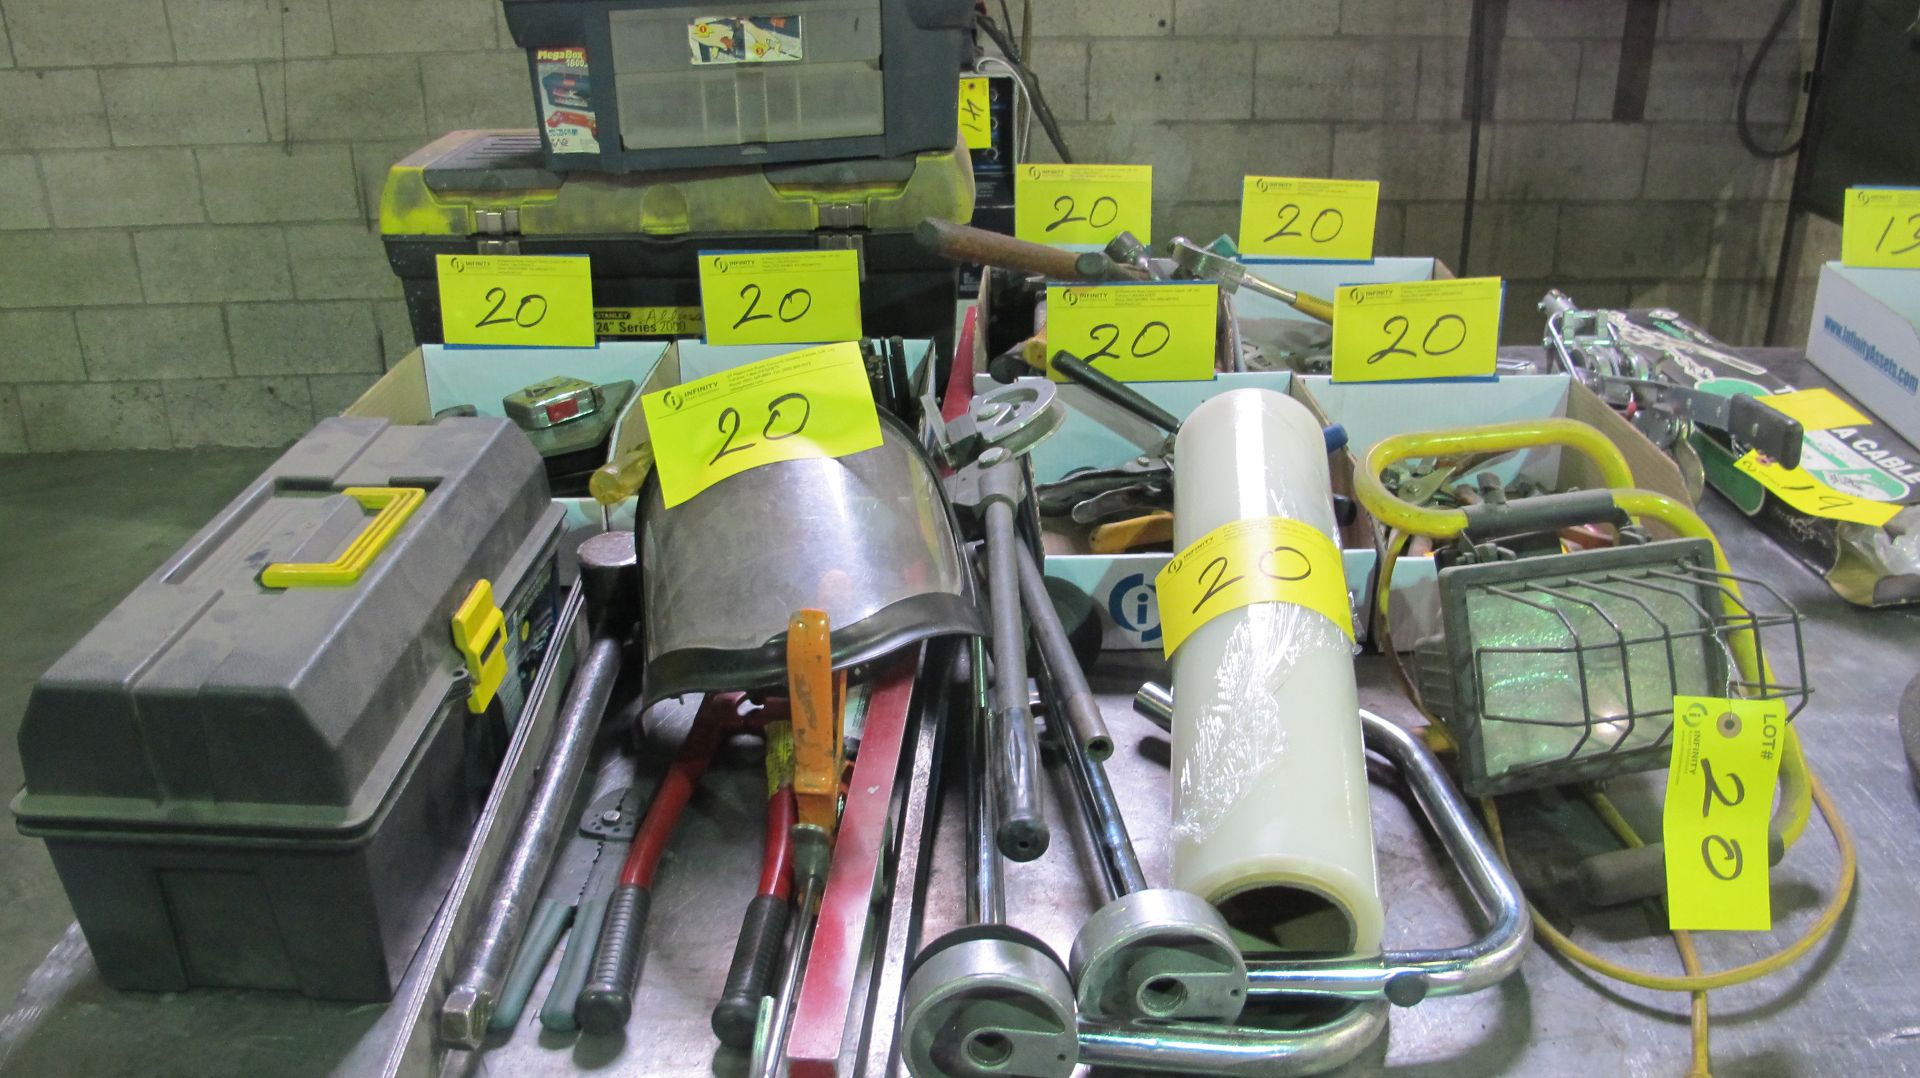 LOT ASST. SHRINK WRAP TOOLS, LIGHTS, CONDUIT BENDERS, PUNCHES, HAND TOOLS, TOOLBOXES, ETC.